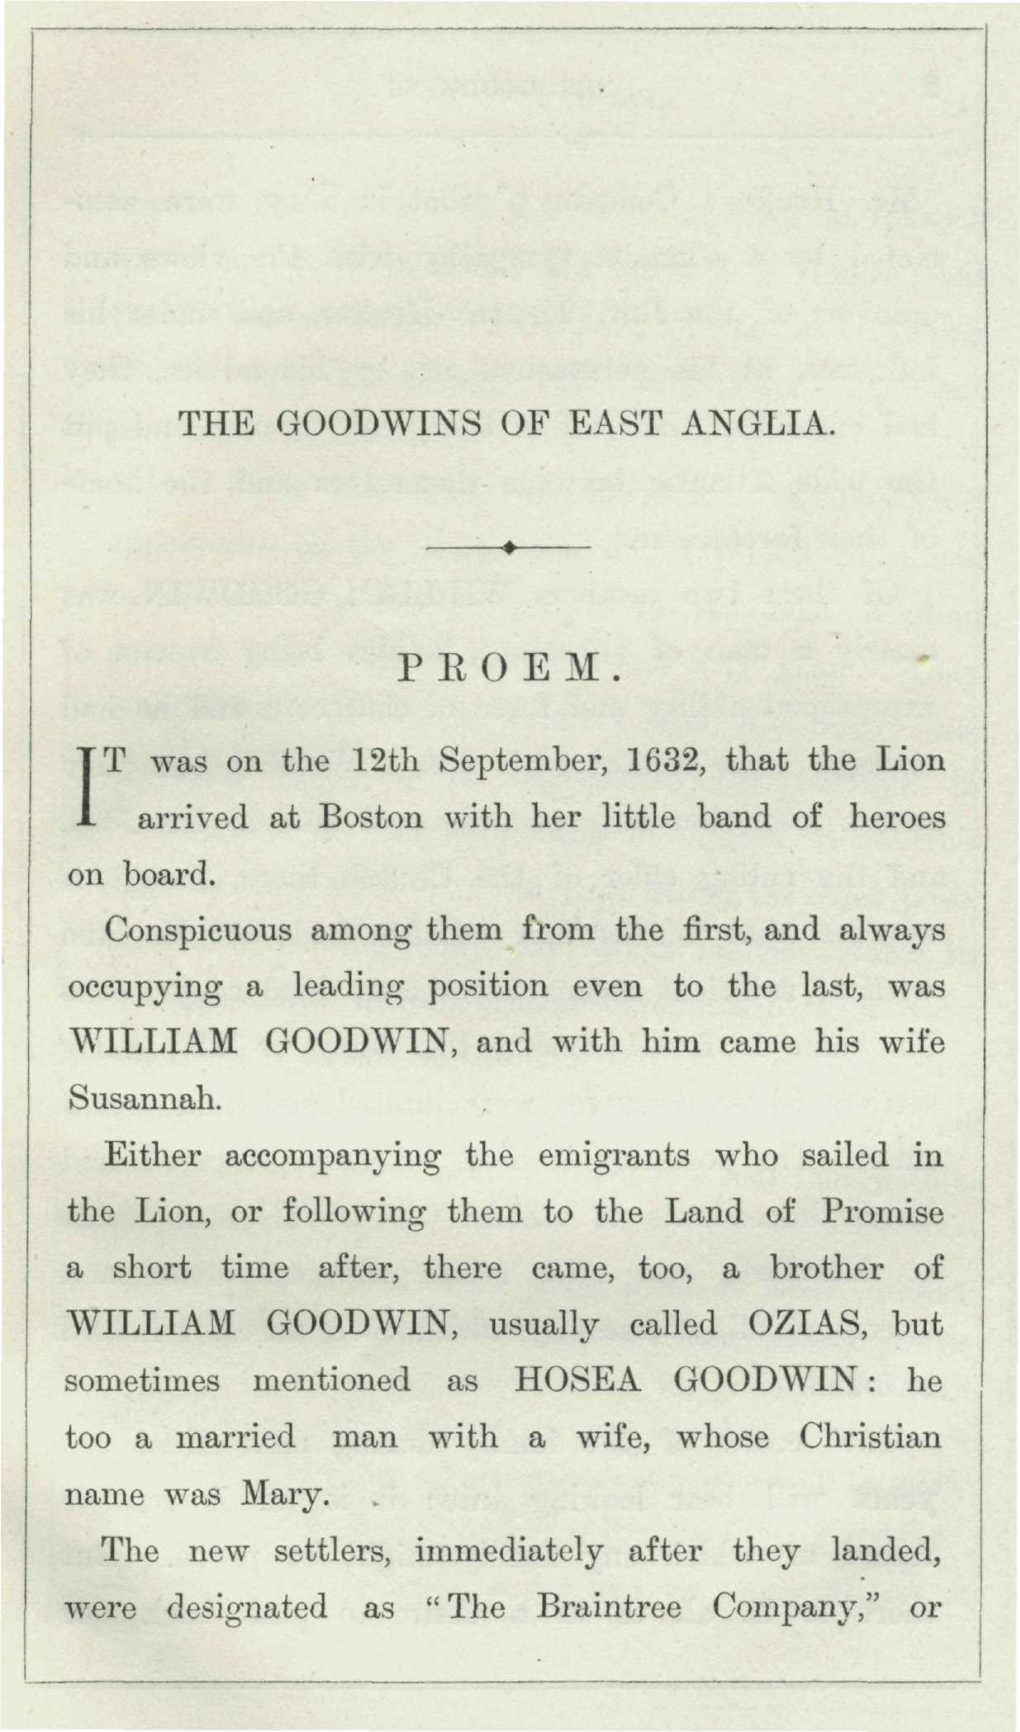 THE GOODWINS of EAST ANGLIA. P E O E M . IT Was on the 12Th September, 1632, That the Lion Arrived at Boston with Her Little